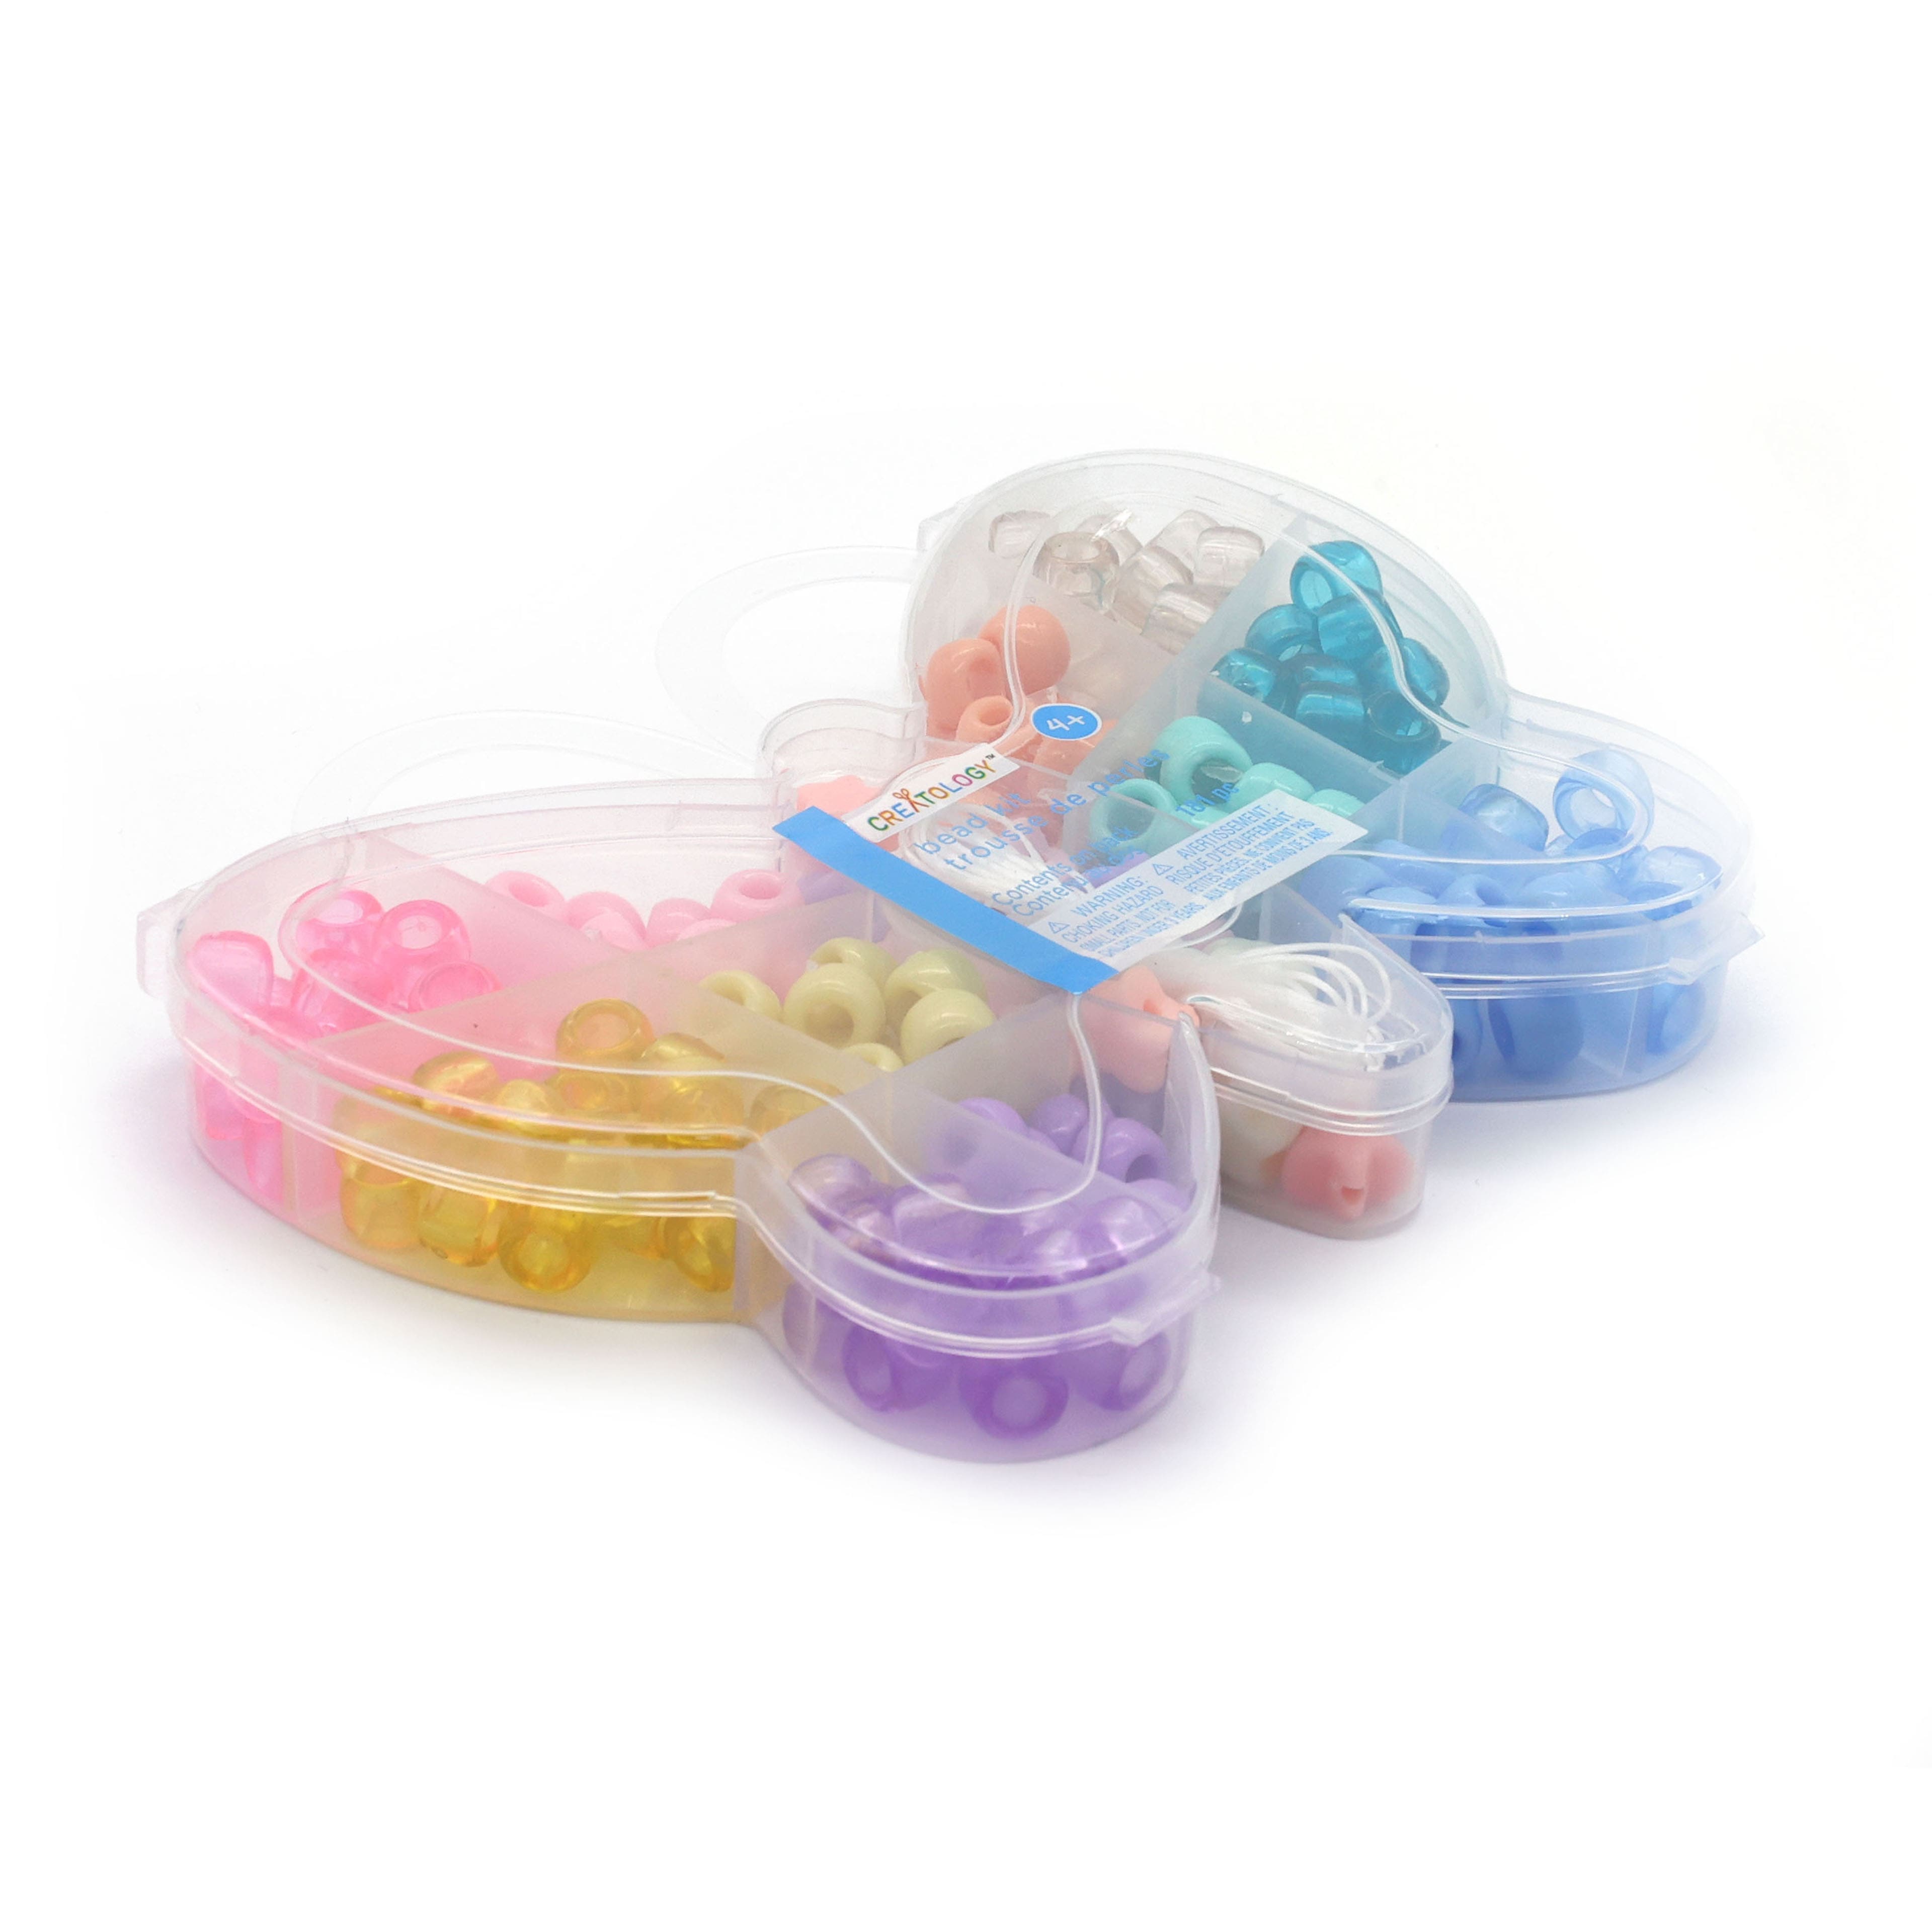 12 Packs: 200 ct. (2,400 total) Butterfly Clay Beads by Creatology™